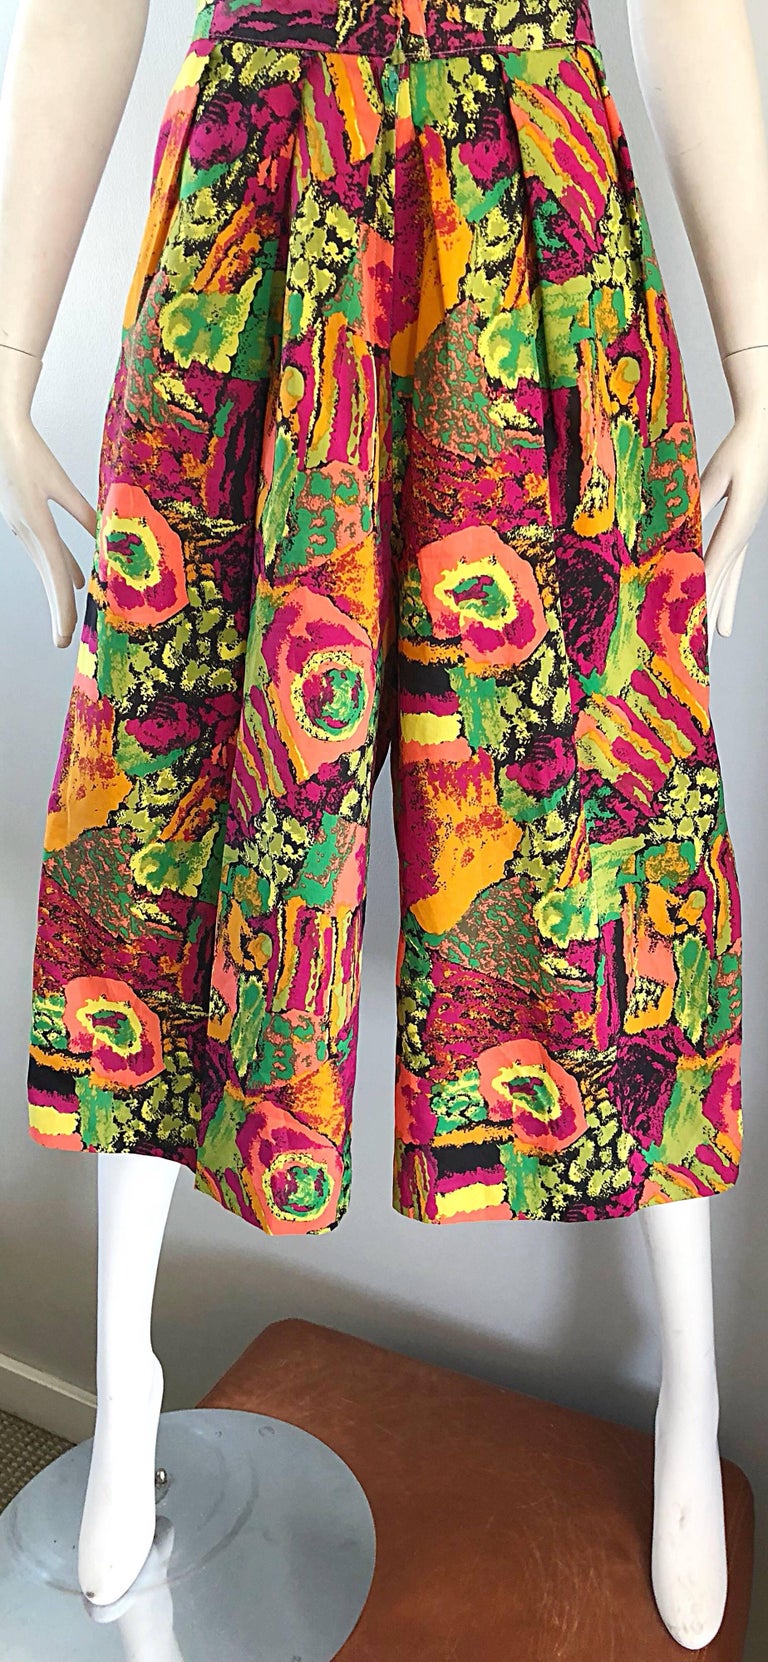 1980s Colorful Pink + Green + Orange Vintage 80s High Waisted Leg Culottes Sale at 1stDibs | culottes shorts 80s, 80s culottes, culottes from the 80s